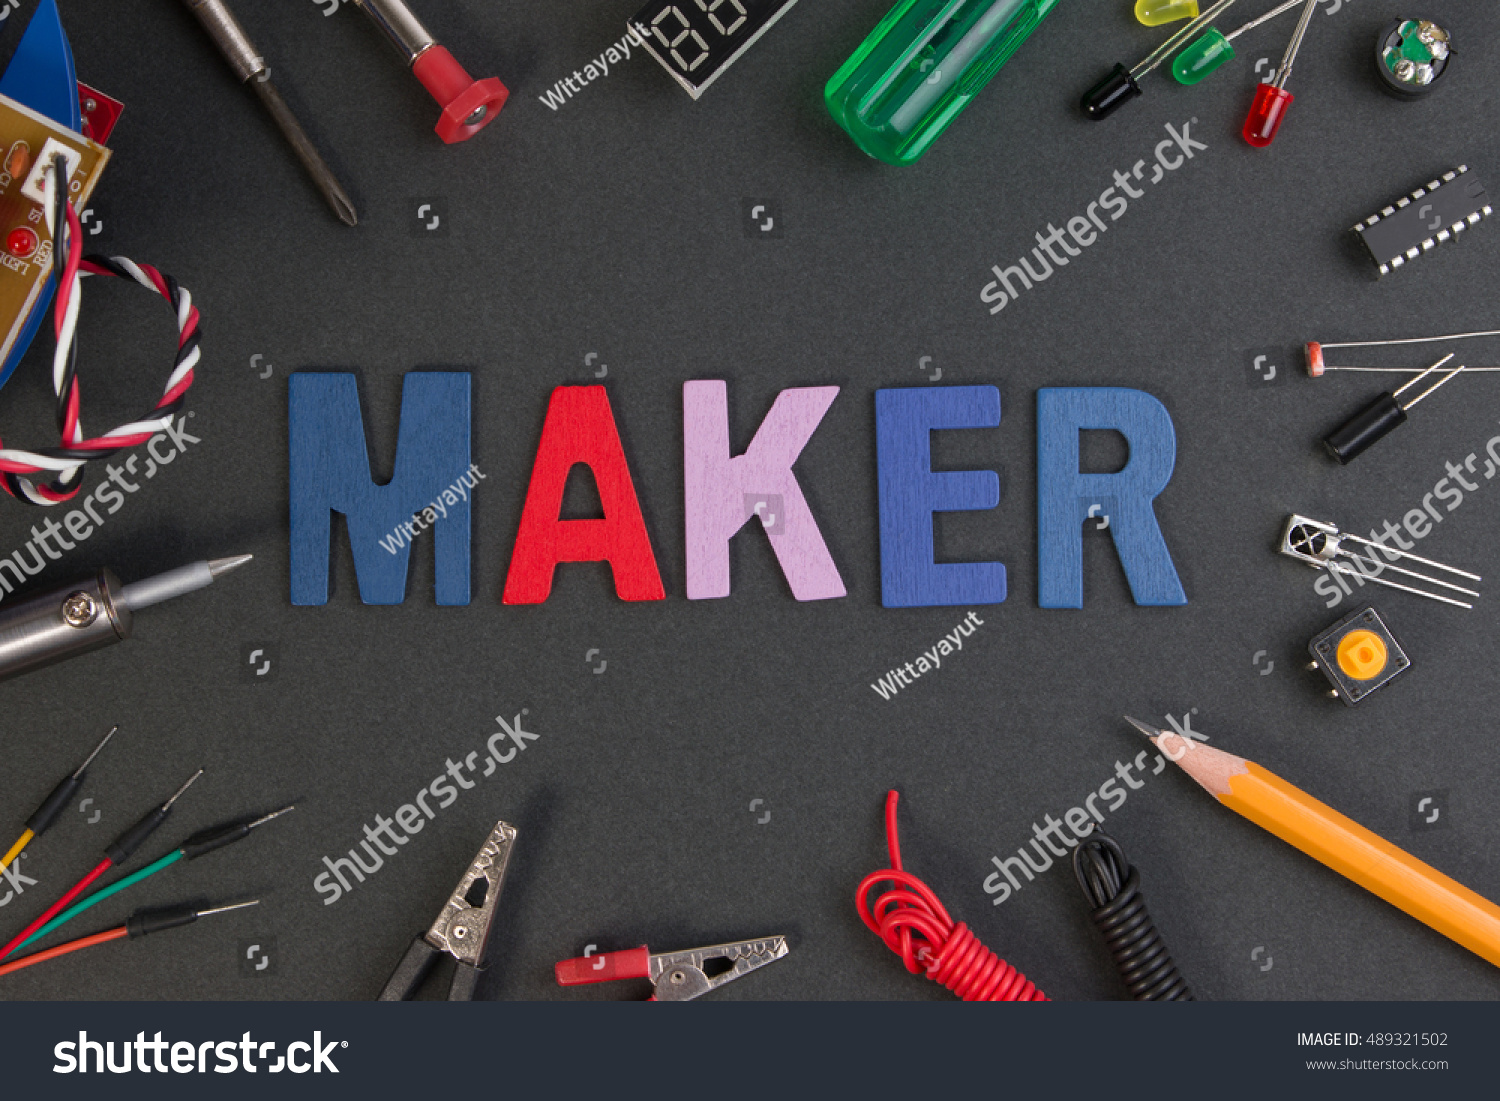 Diy Electronic Maker Tools Components On Stock Photo 489321502